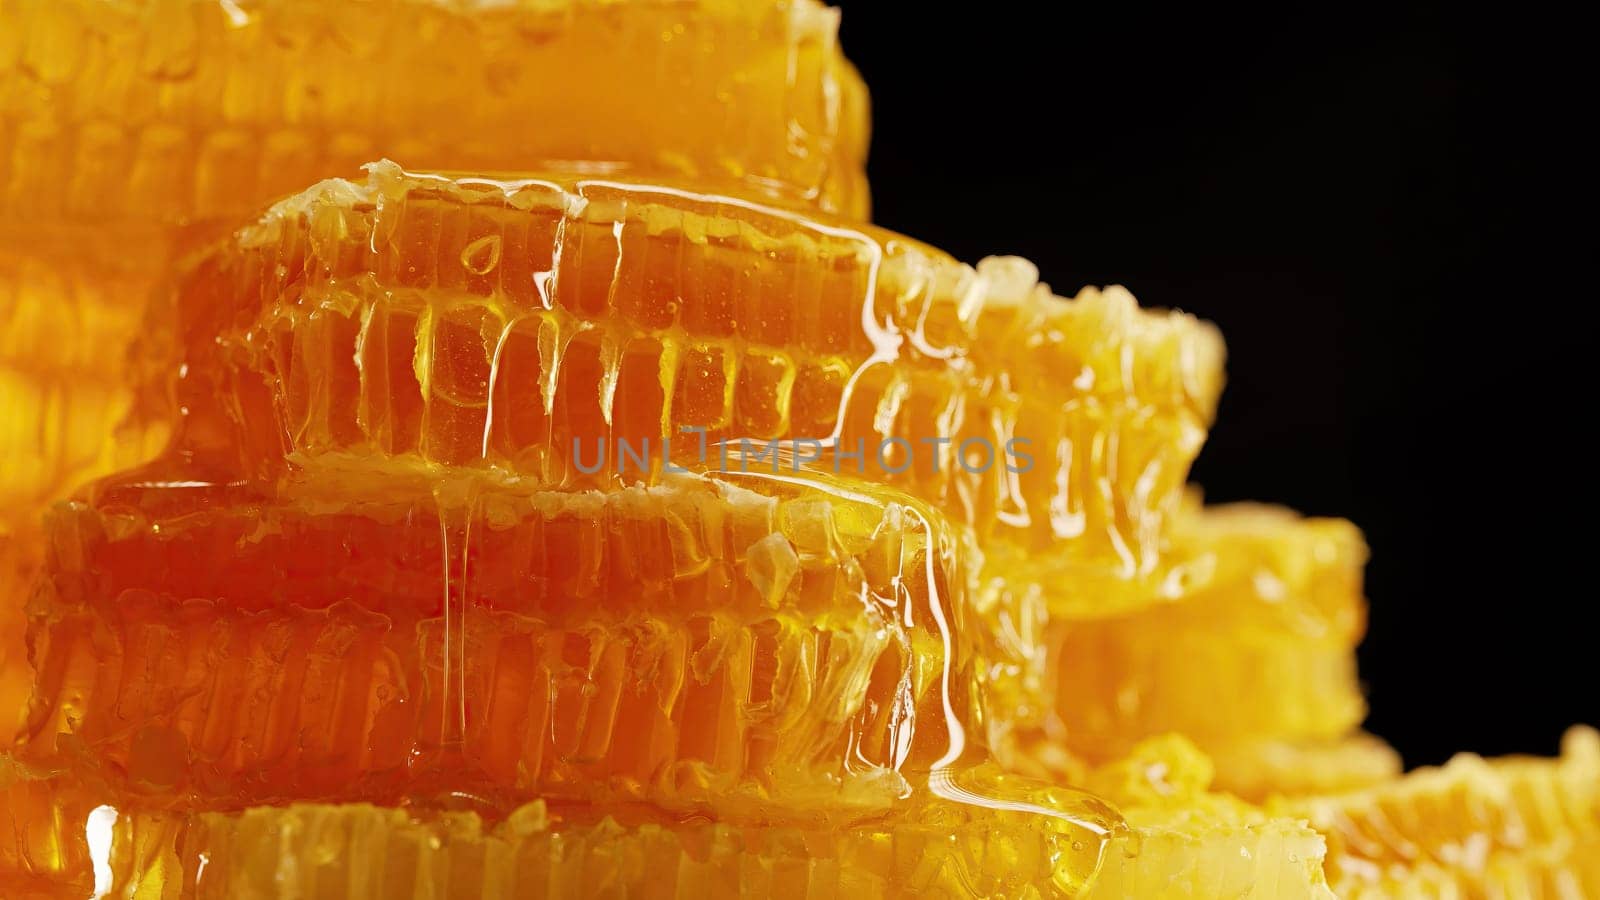 Raw honeycombs with pouring pure golden honey elixir. Amazing tasty flow. Macro texture, structure of flower nectar. Sweet visuals, stunning details. High quality